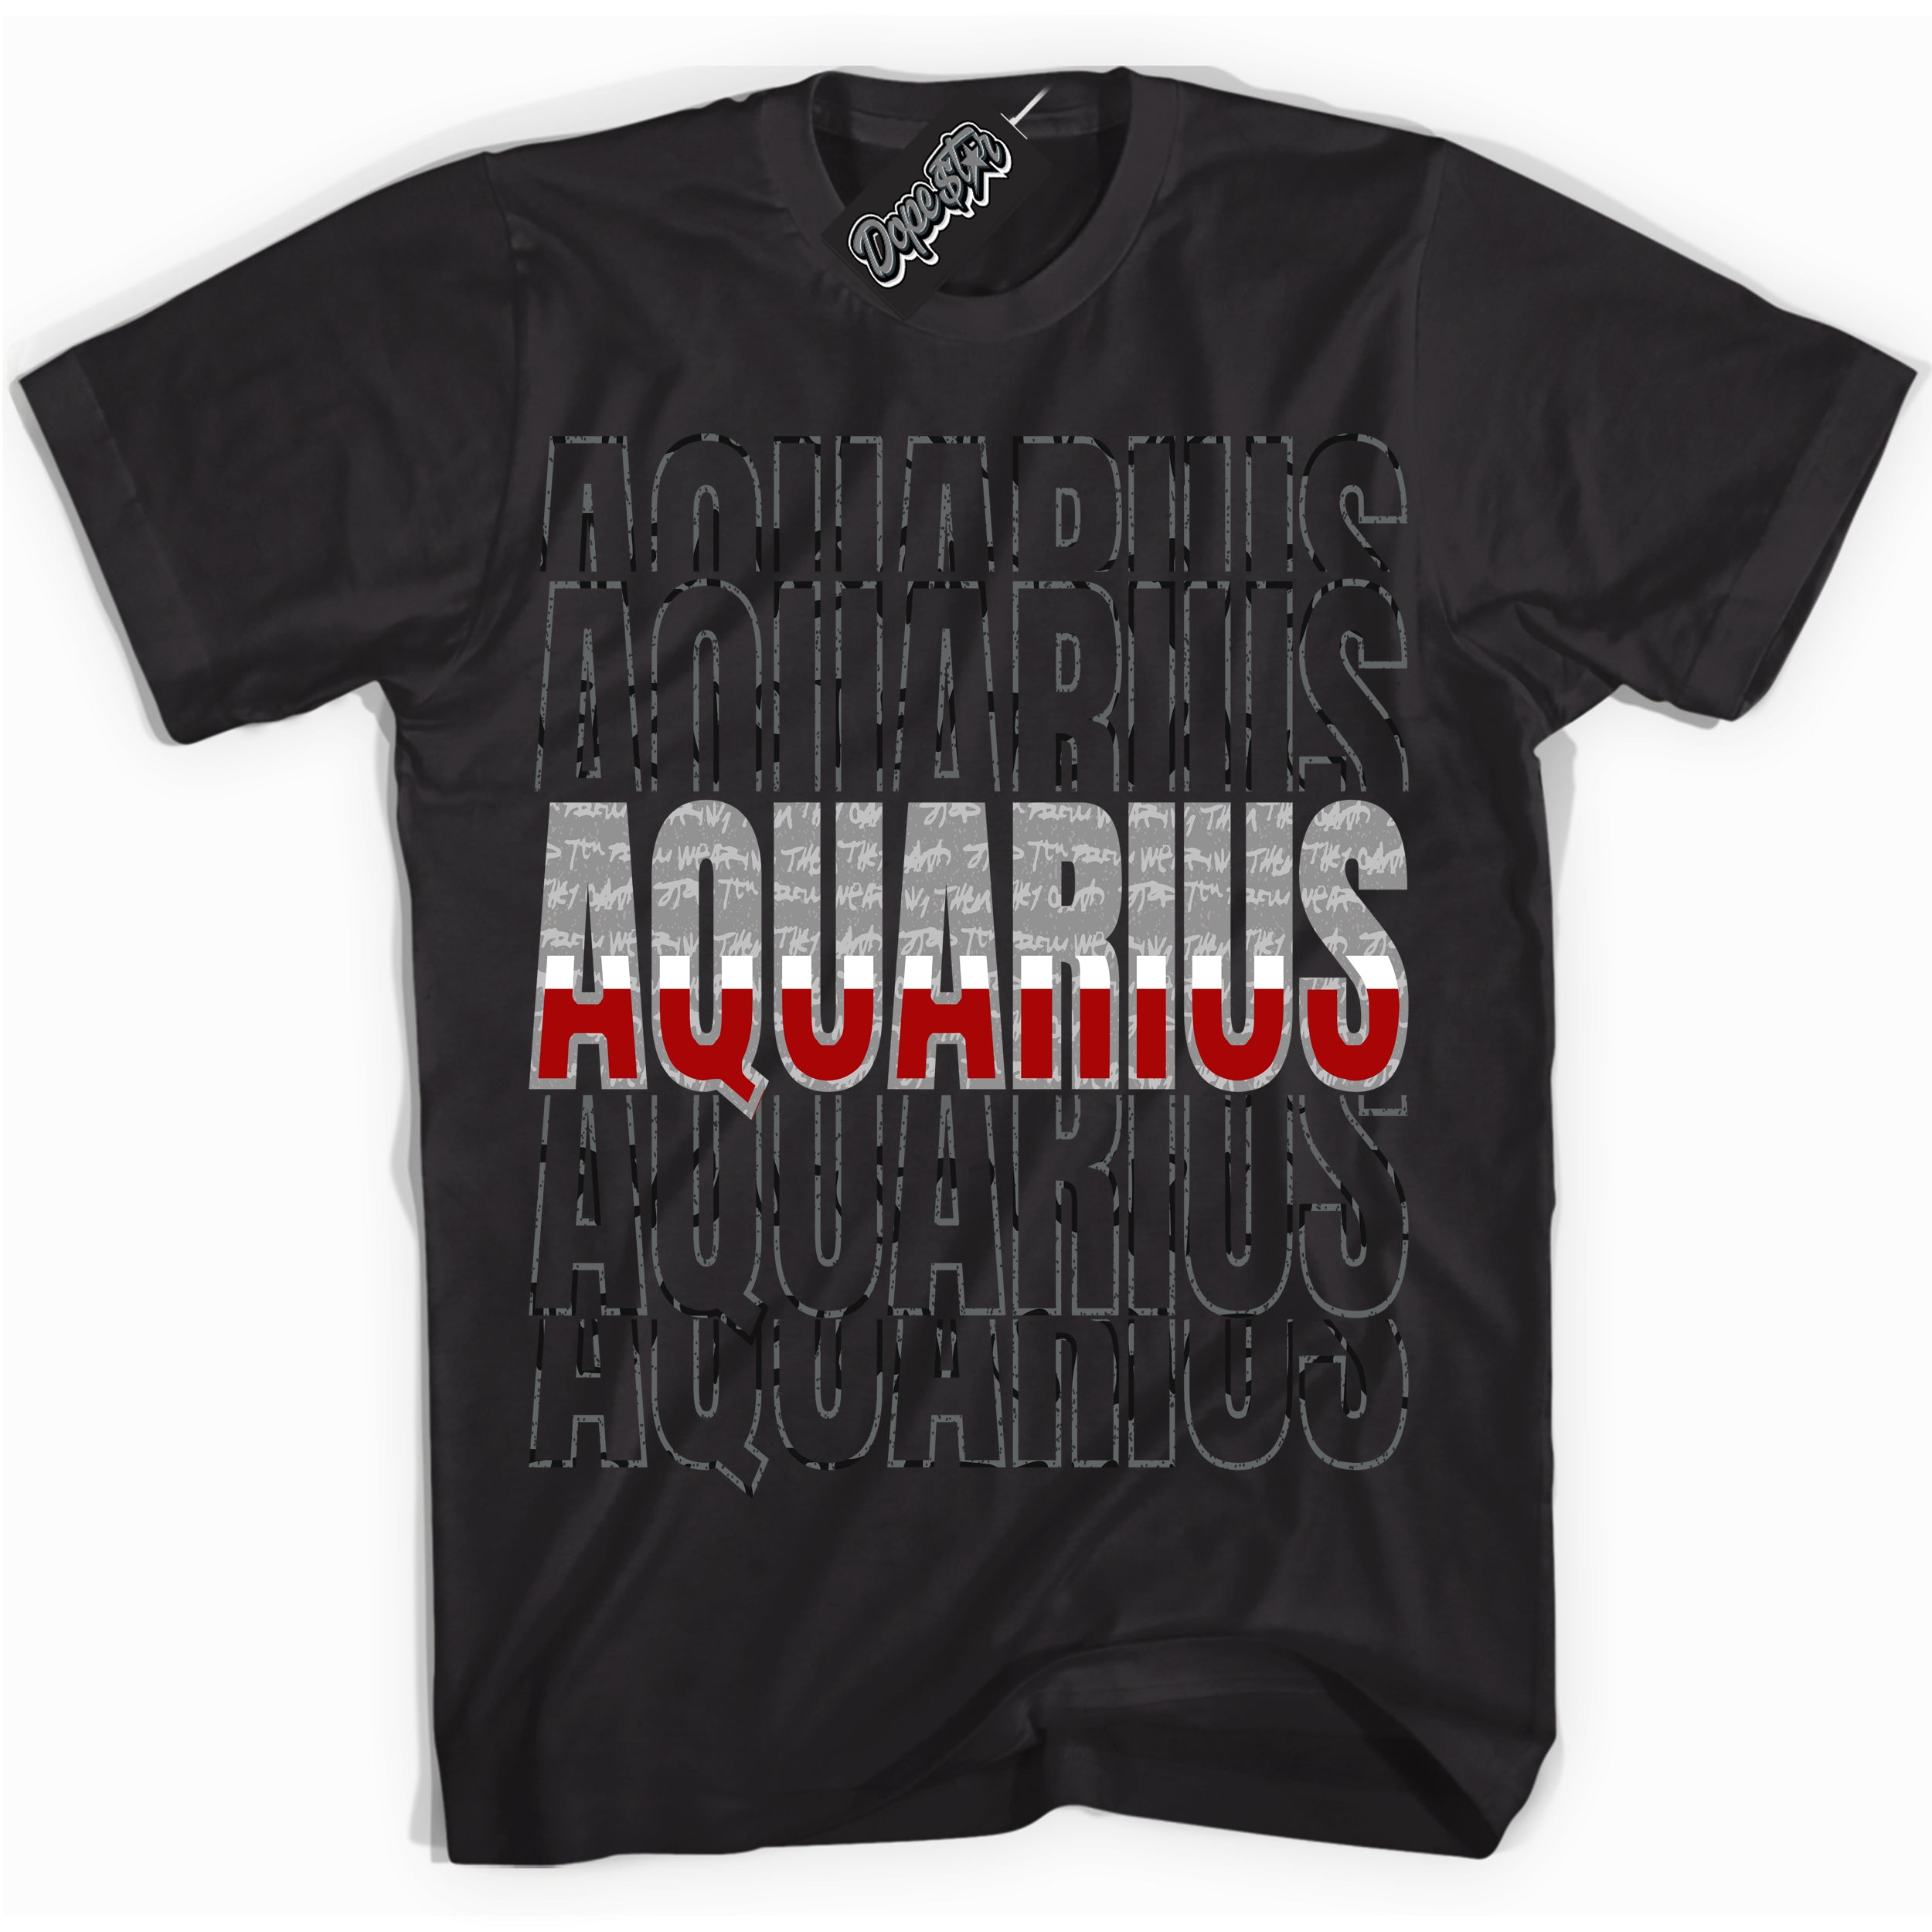 Cool Black Shirt with “ Aquarius ” design that perfectly matches Rebellionaire 1s Sneakers.